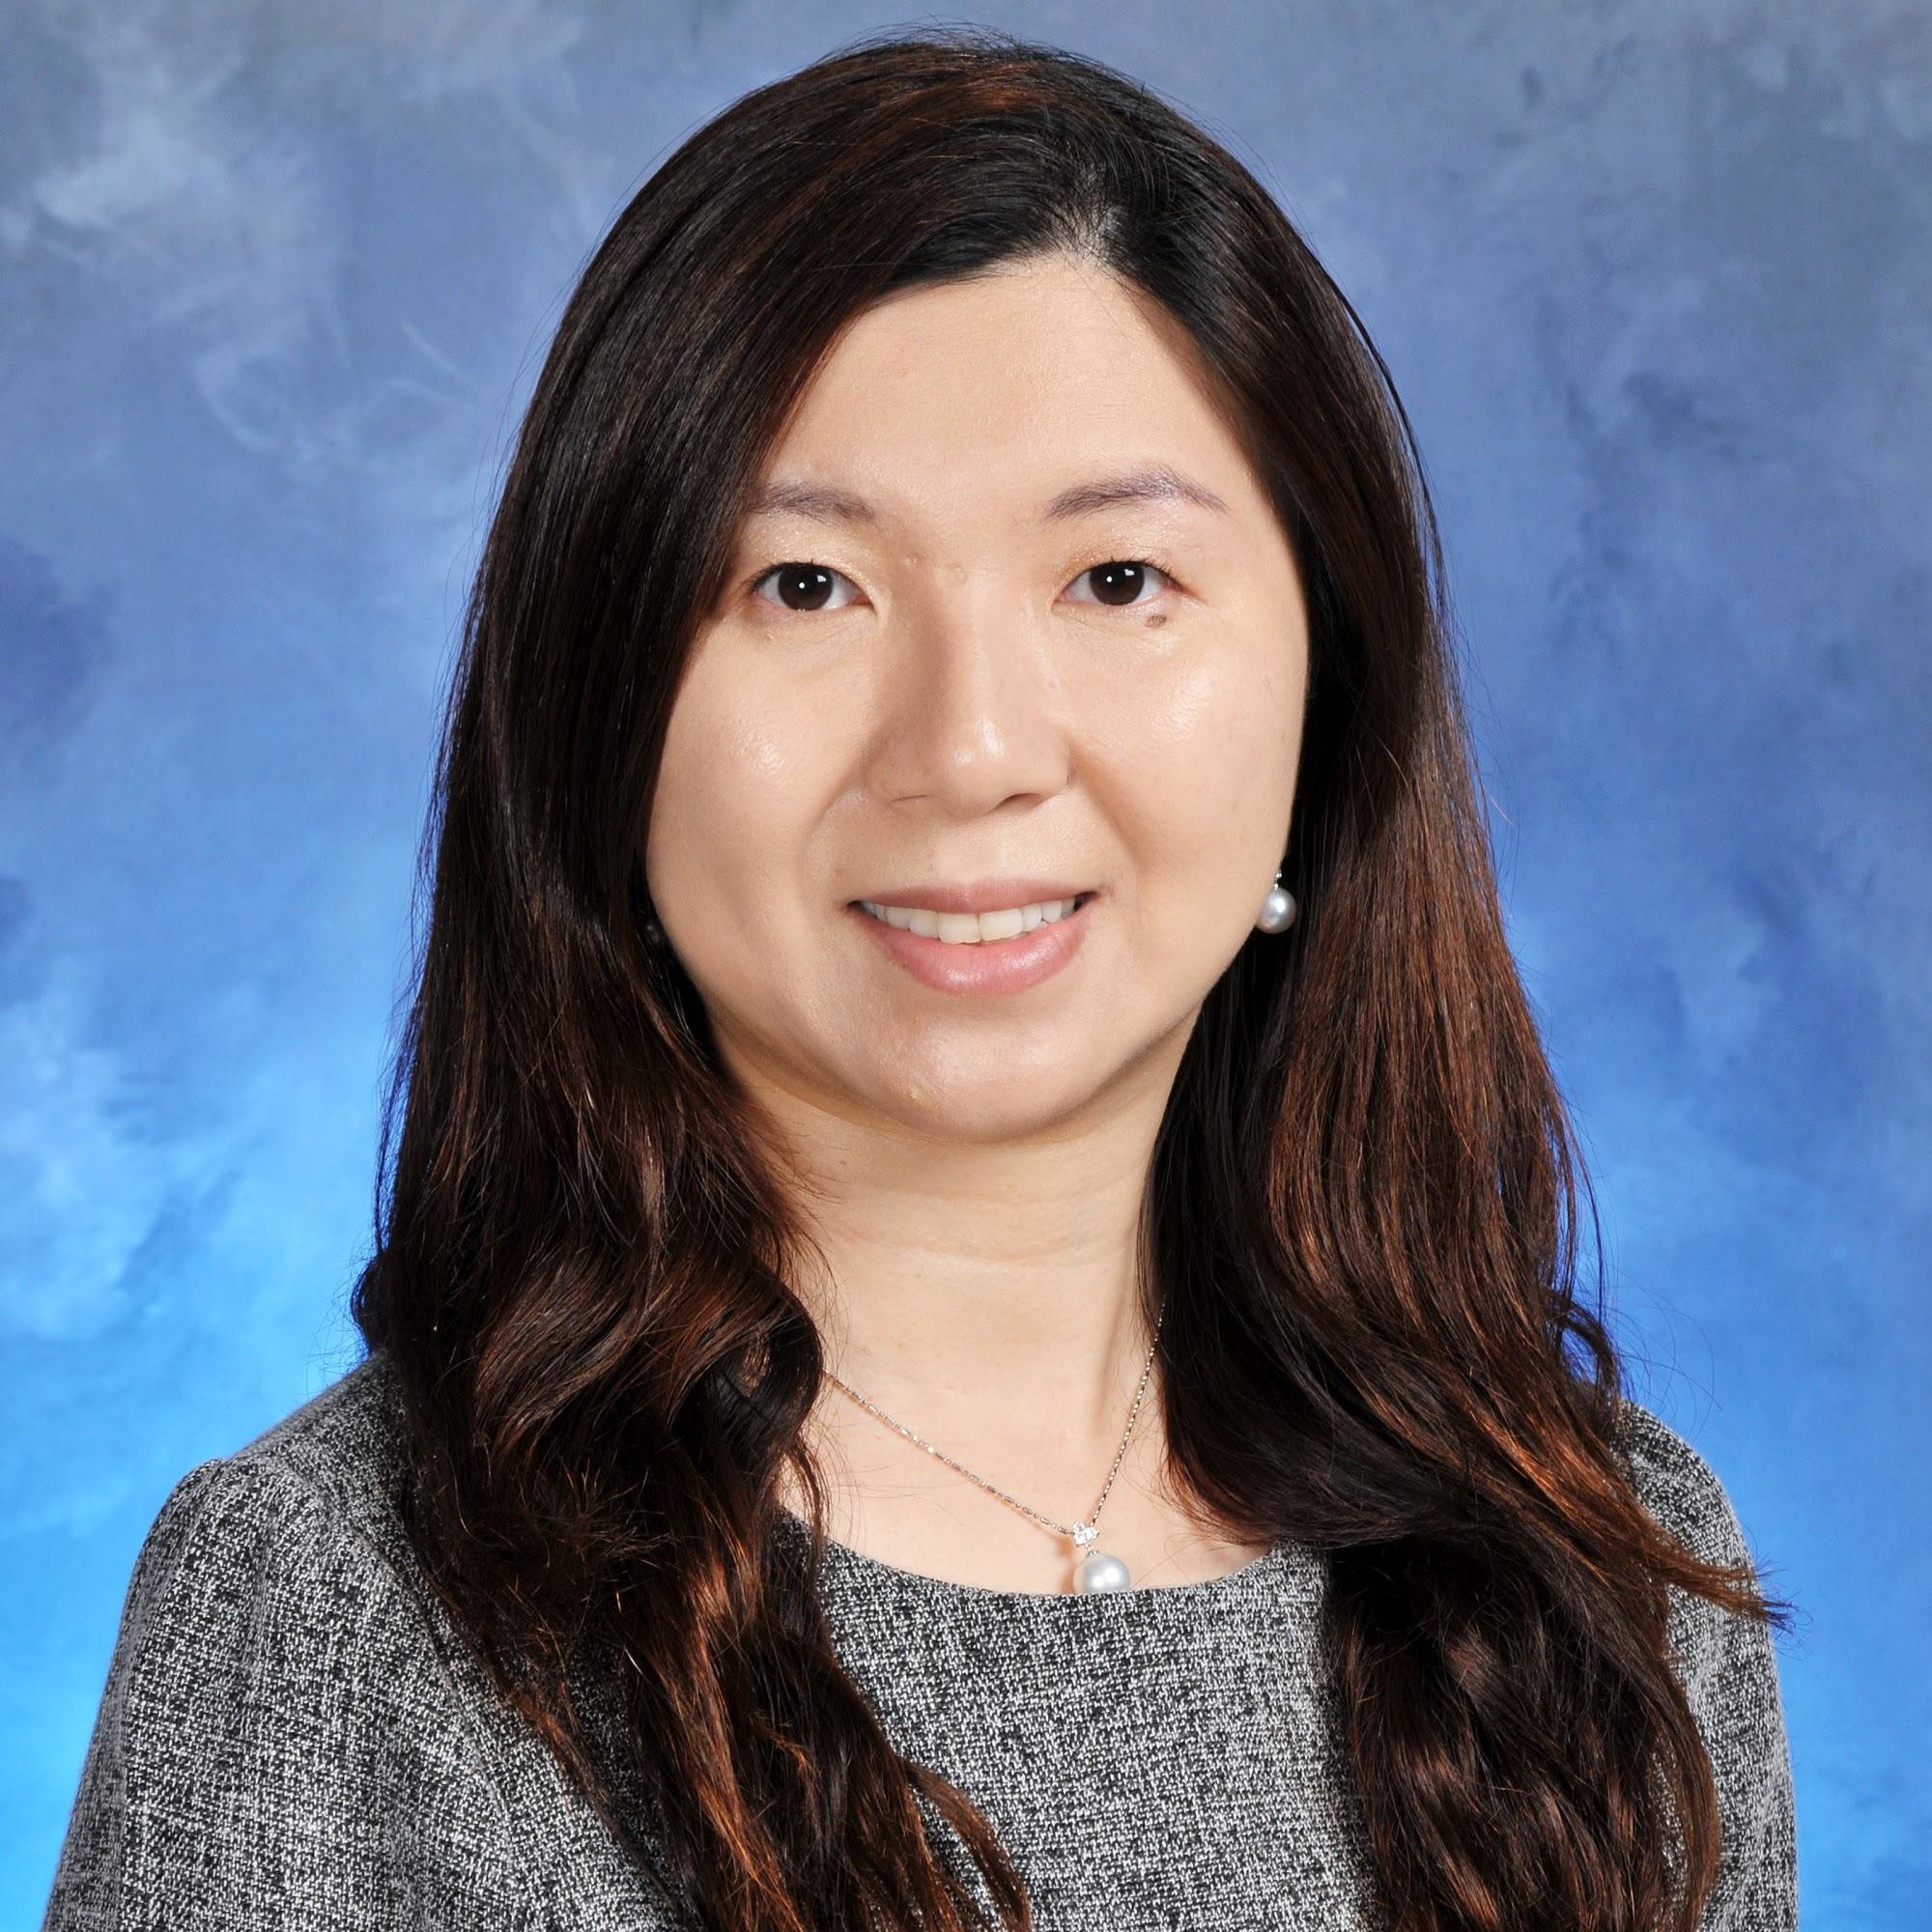 Dr. Yung Hoi Ling Janice